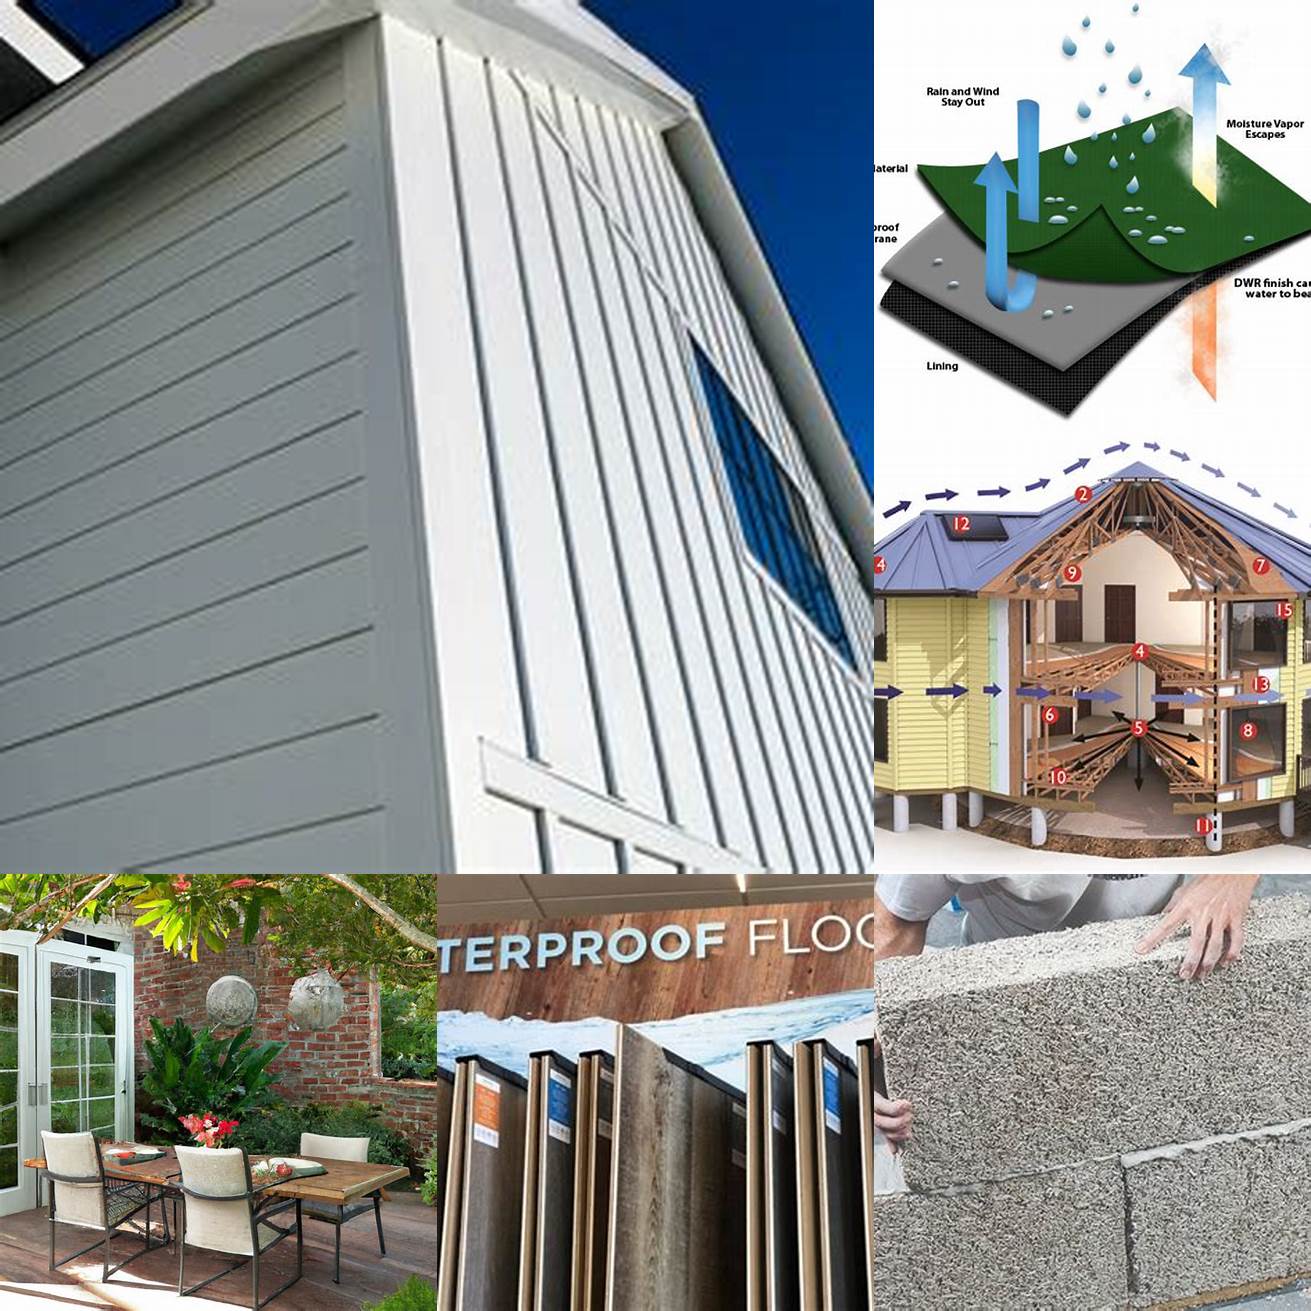 Choose a durable and weather-resistant material